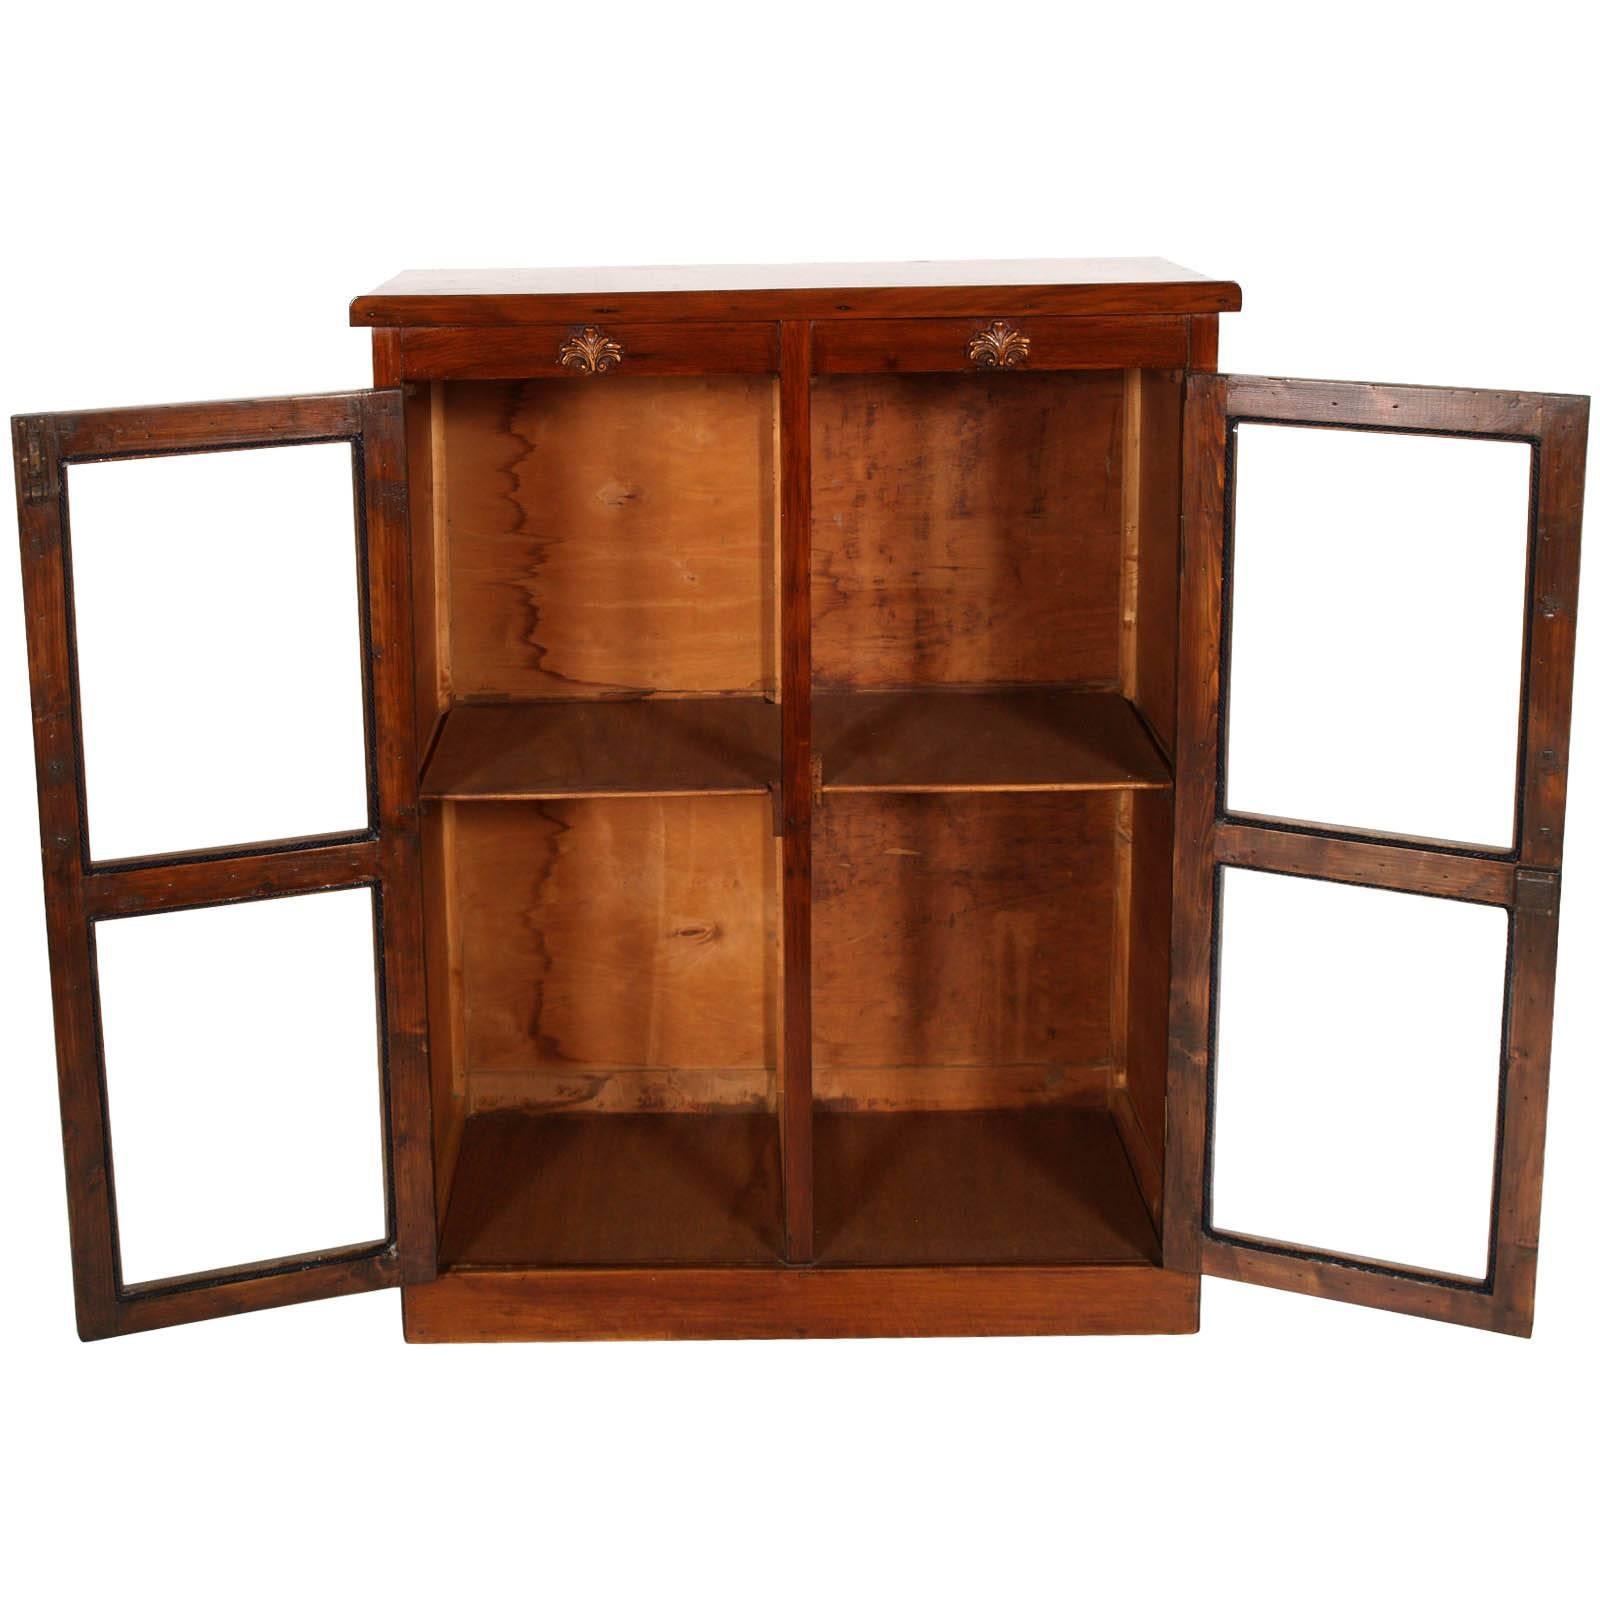 Italian Late 19th Century Country Glazed Cabinet with Secret on Top Walnut Wax-Polished